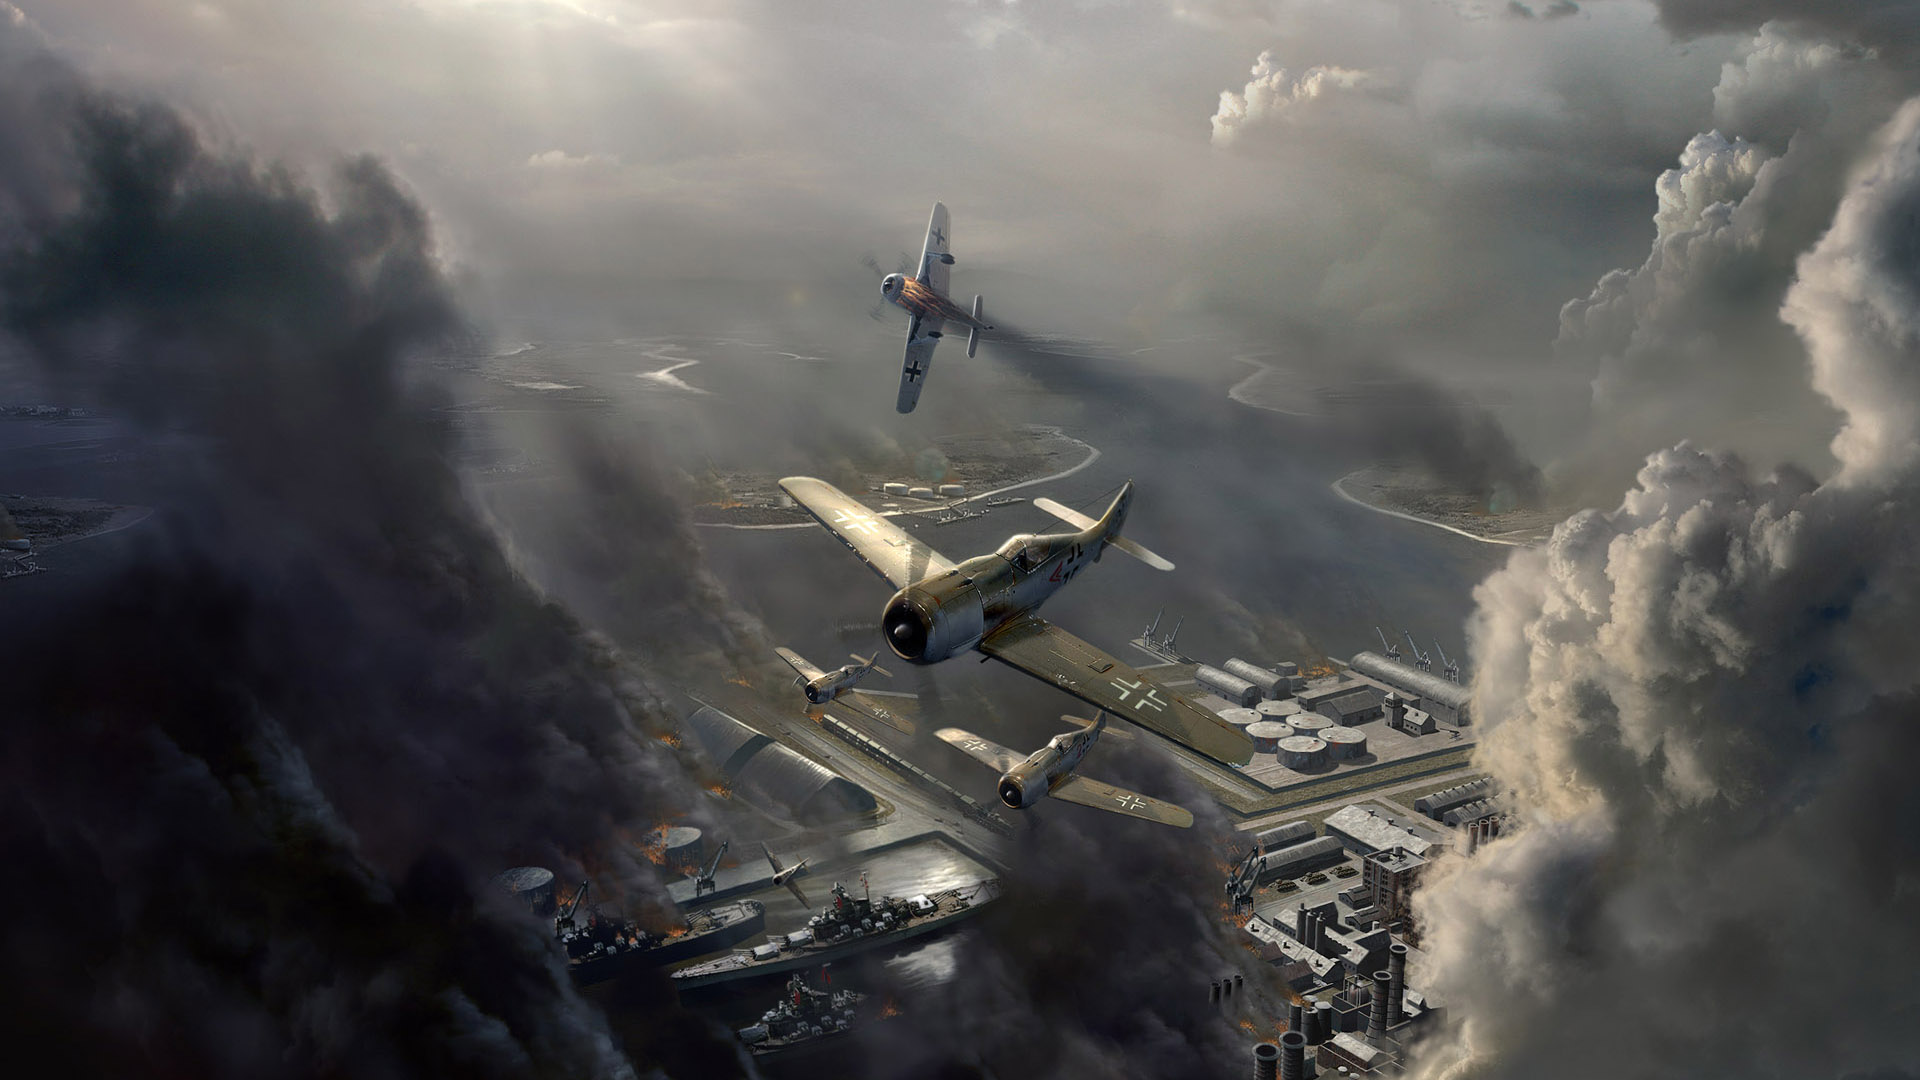 Airplane engaged in a fierce battle, depicted in a stunning painting.